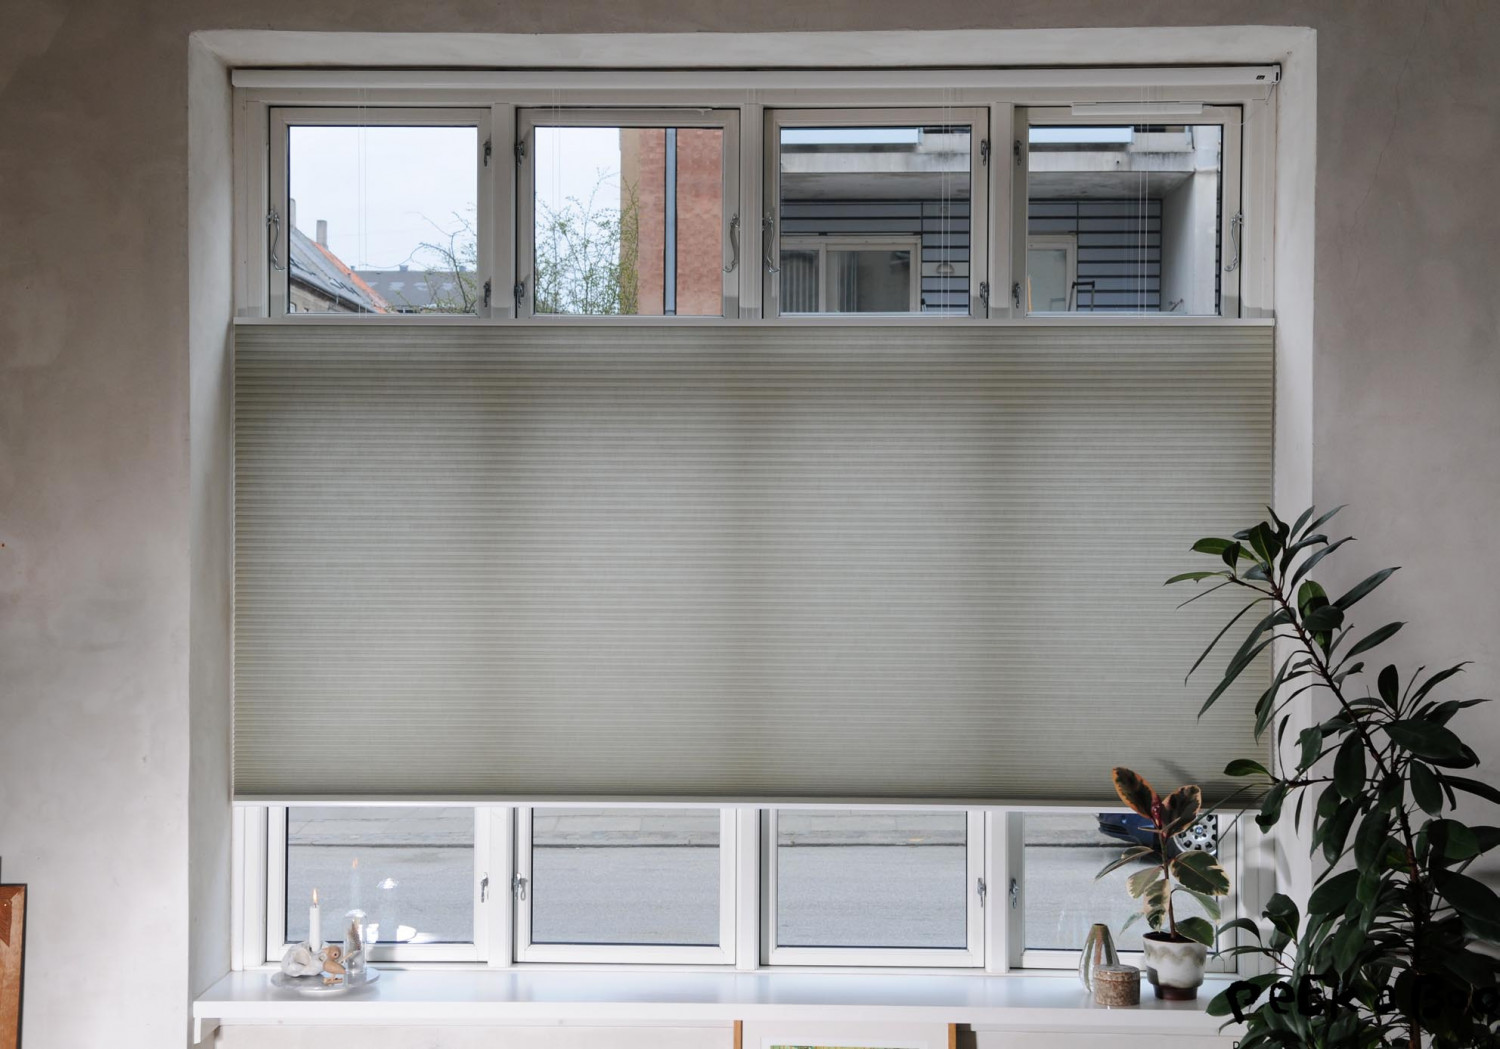 When you need to cover just a part of the window, these blinds can go from the top down and only cover the middle part of the window.